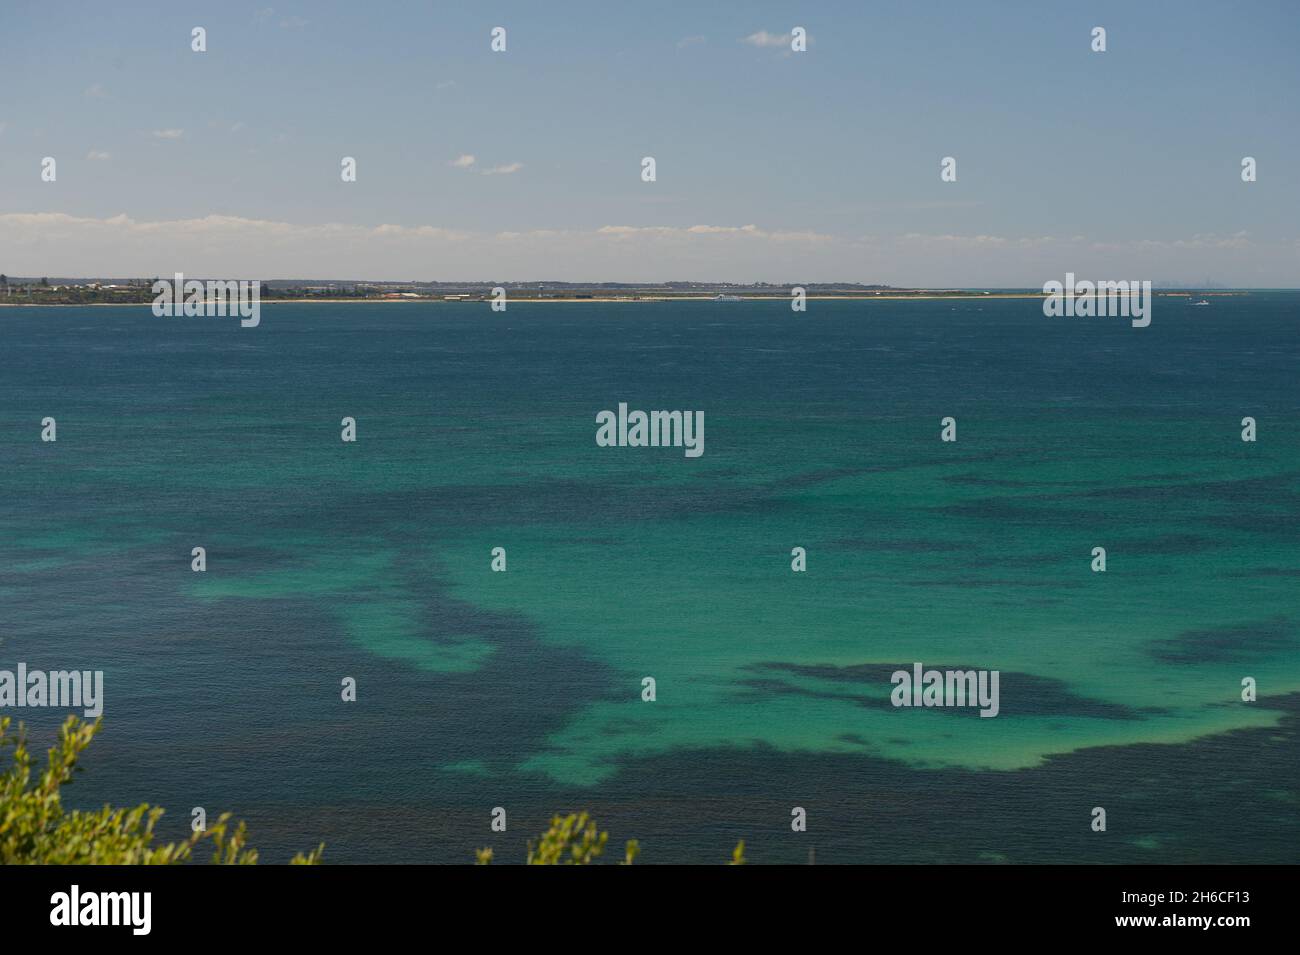 A distant view of the Bellarine Peninsula across the green waters of Port Phillip Bay from Point Nepean in Victoria, Australia. Stock Photo